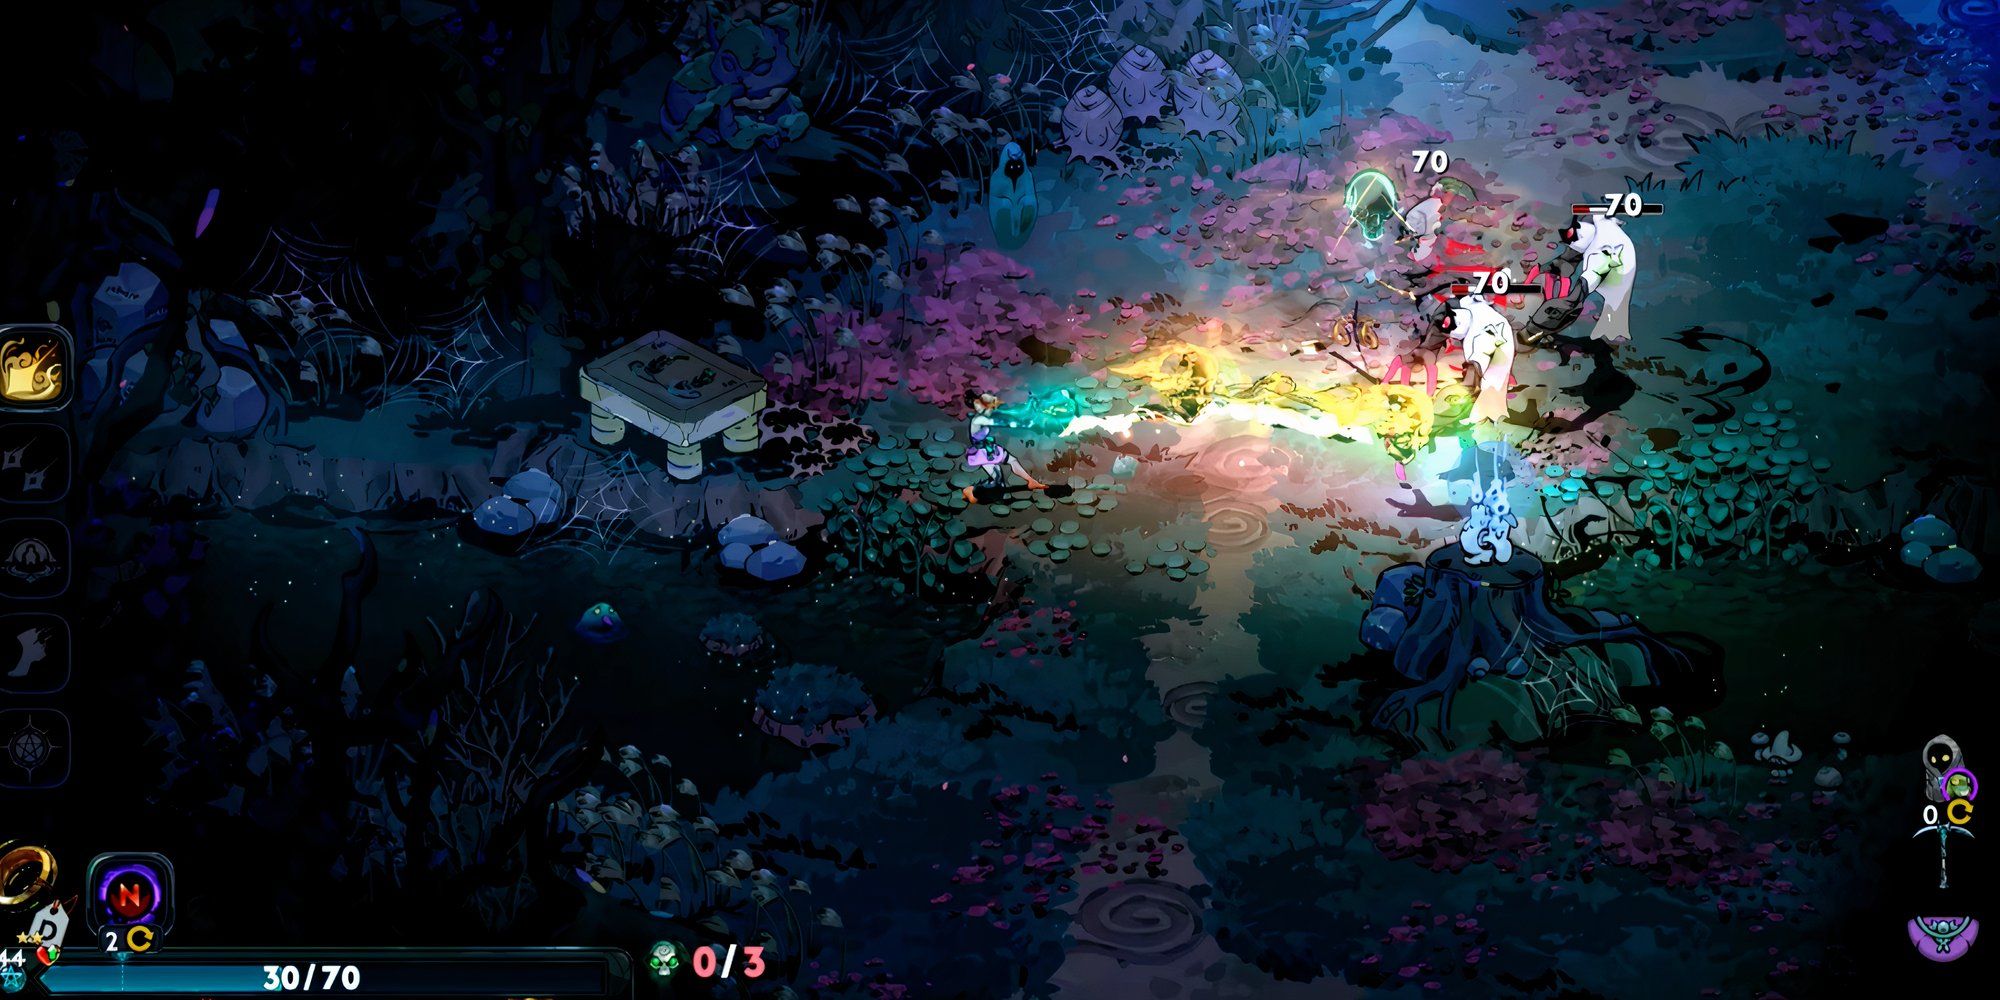 Fighting enemies with Argent Skull weapon in Hades 2